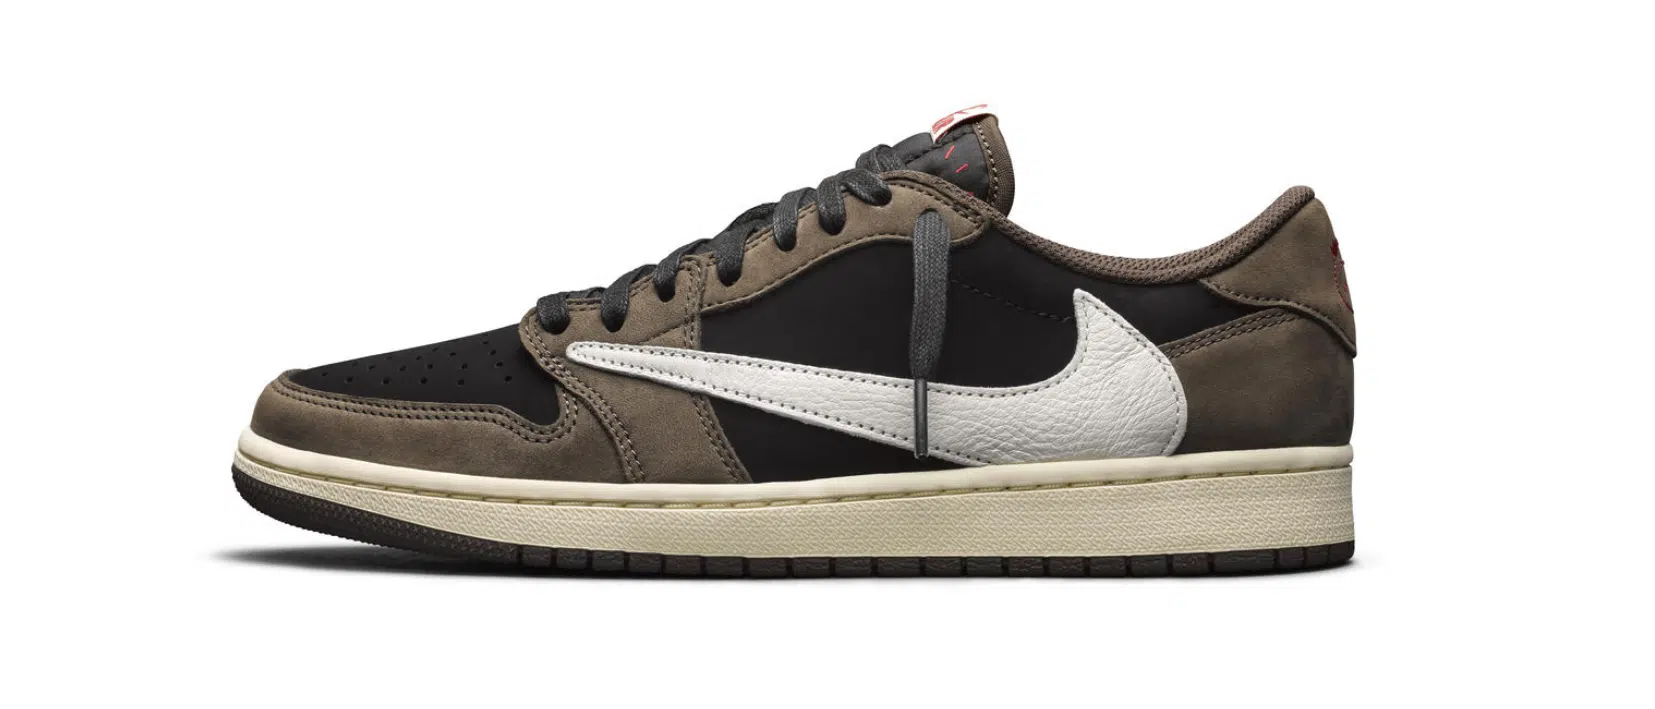 Nike and Travis Scott Sneaker Collaboration